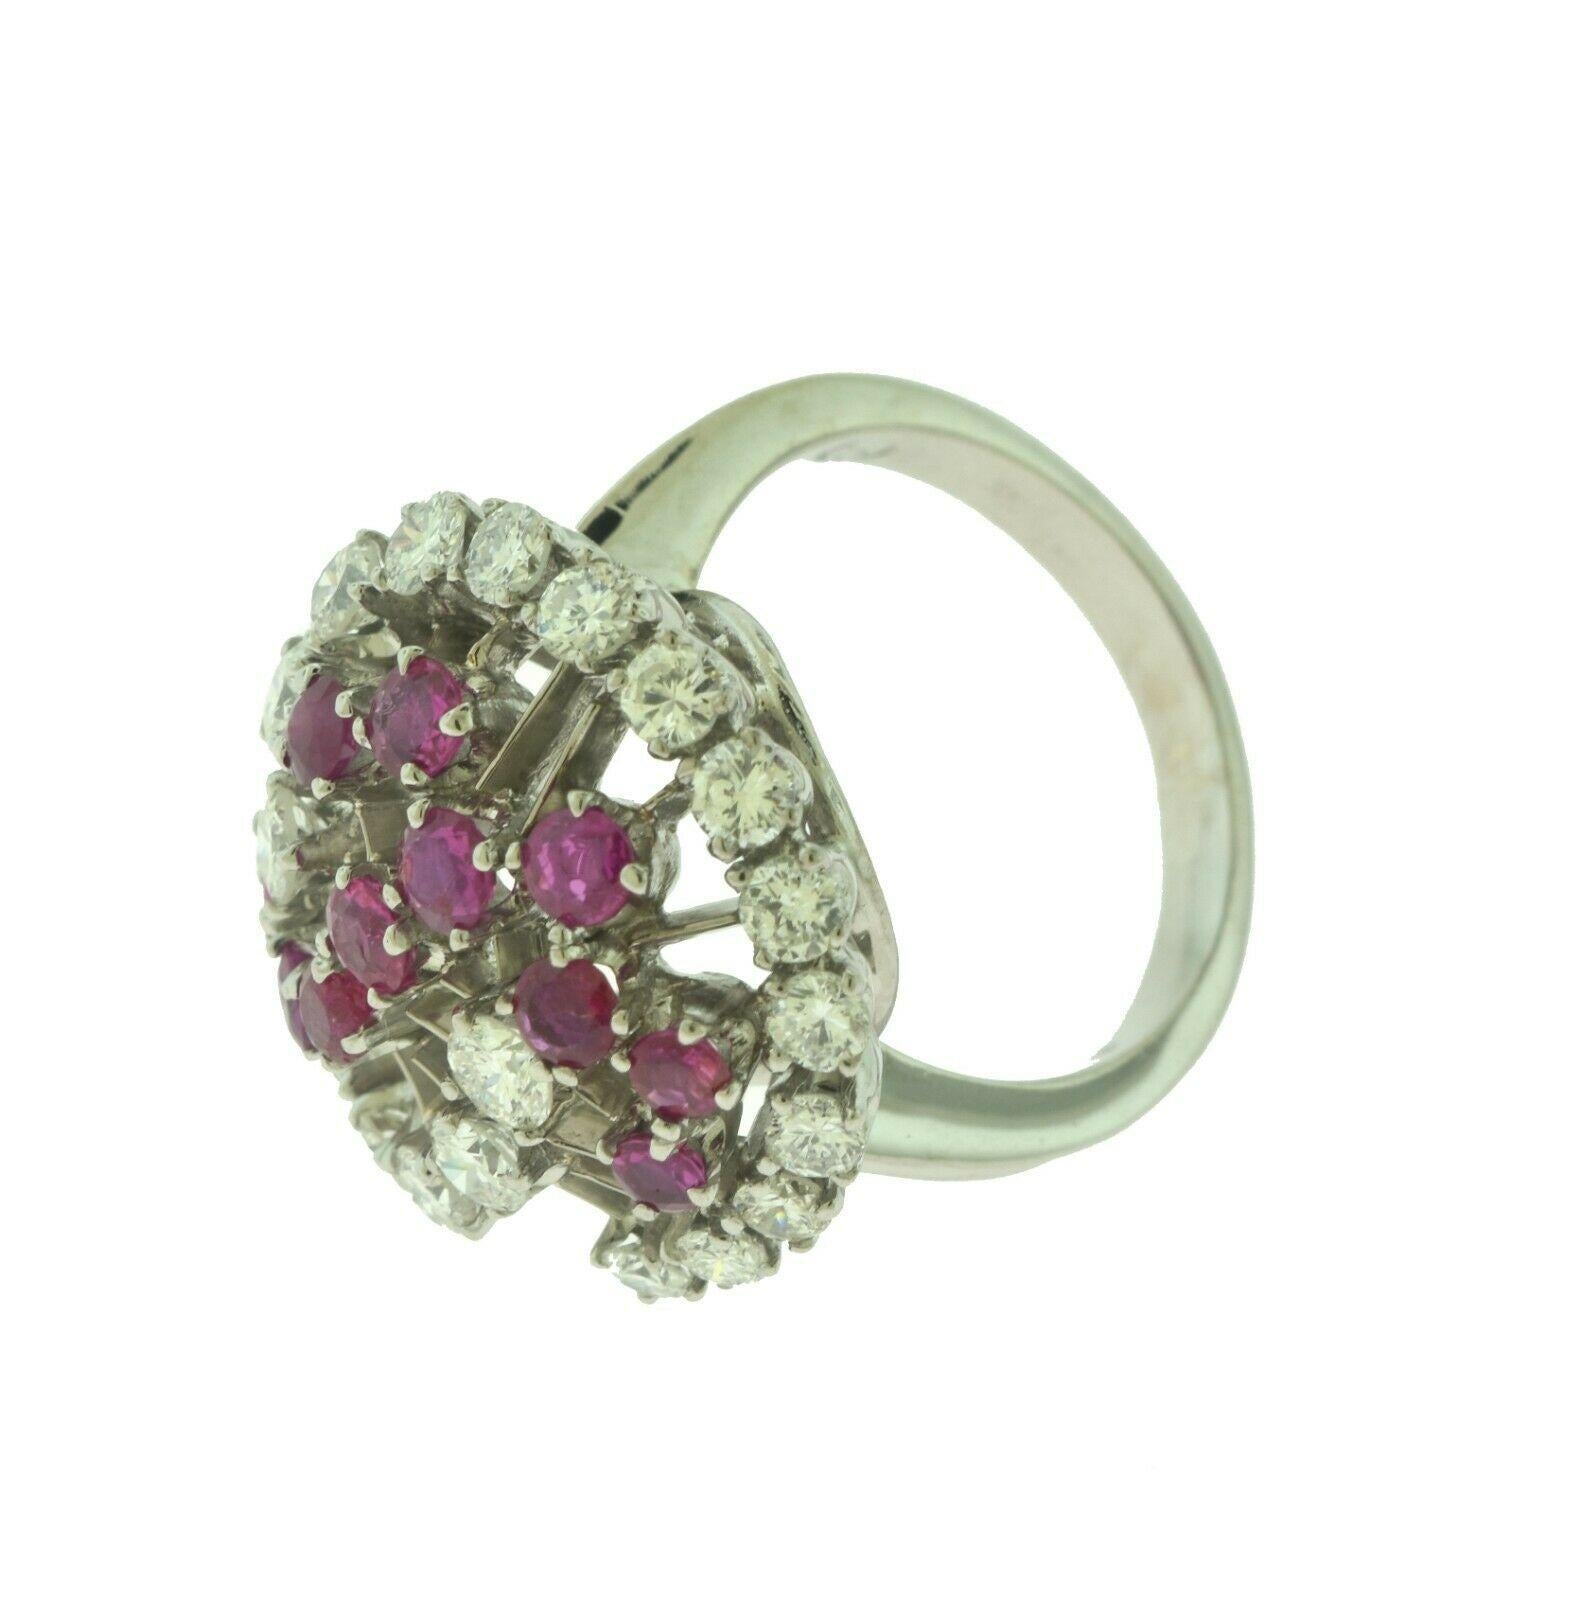 Diamond and Ruby Swirl Motif Cocktail Ring In Good Condition For Sale In Miami, FL